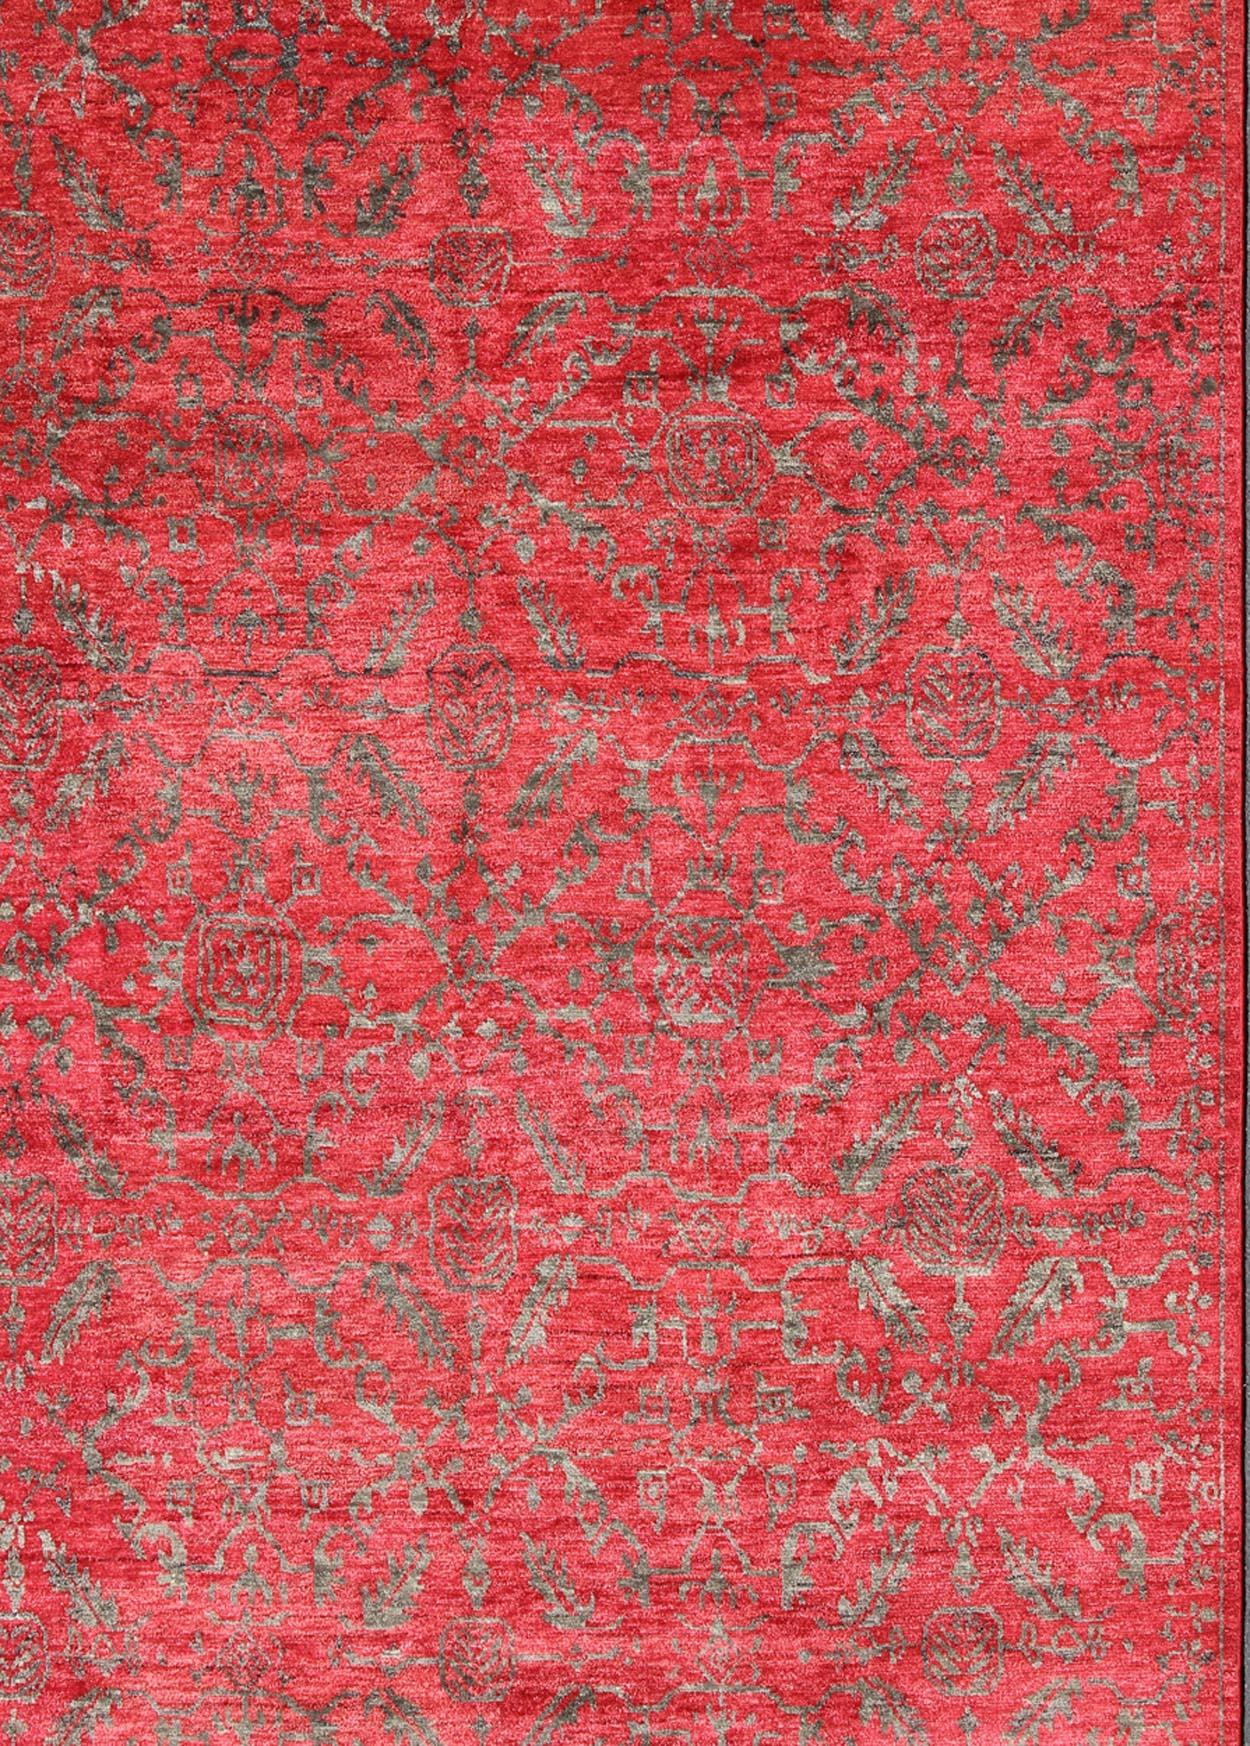 Modern Large Transitional All-Over Design Red Background Rug with Gray Highlights